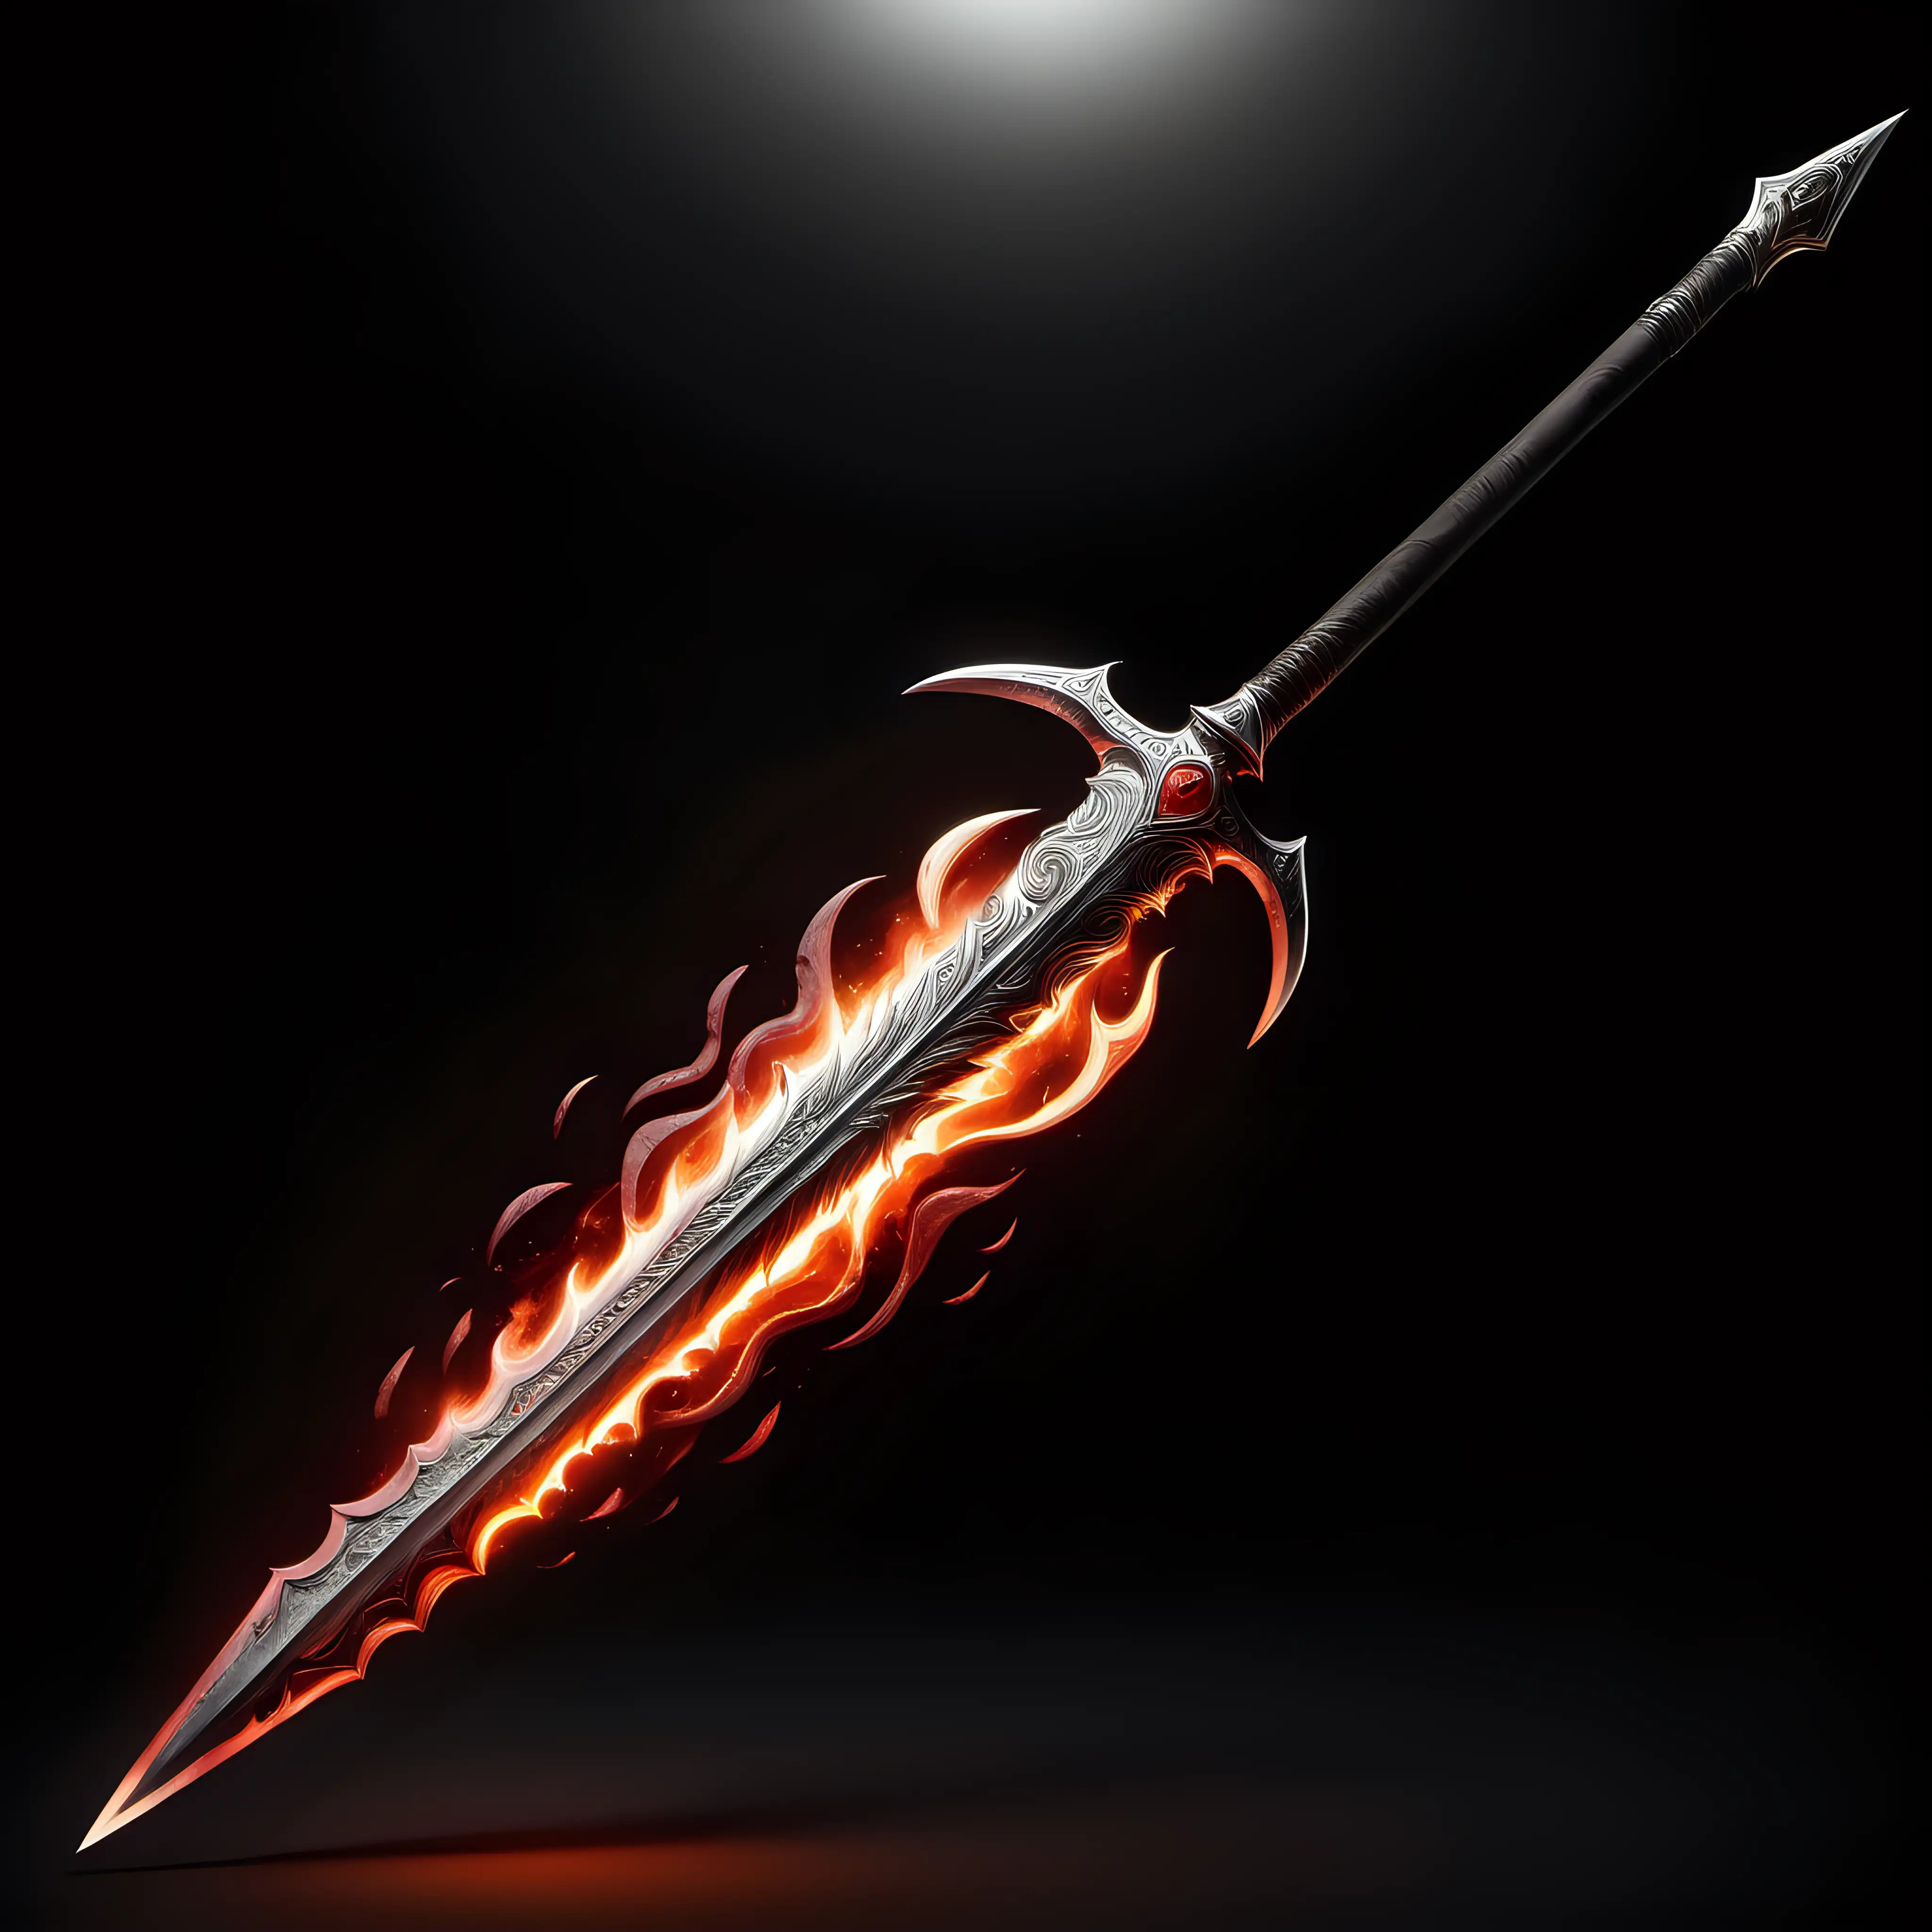 AshColored DoubleSided Polearm with Carmine Flames and VolcanoSun Motif